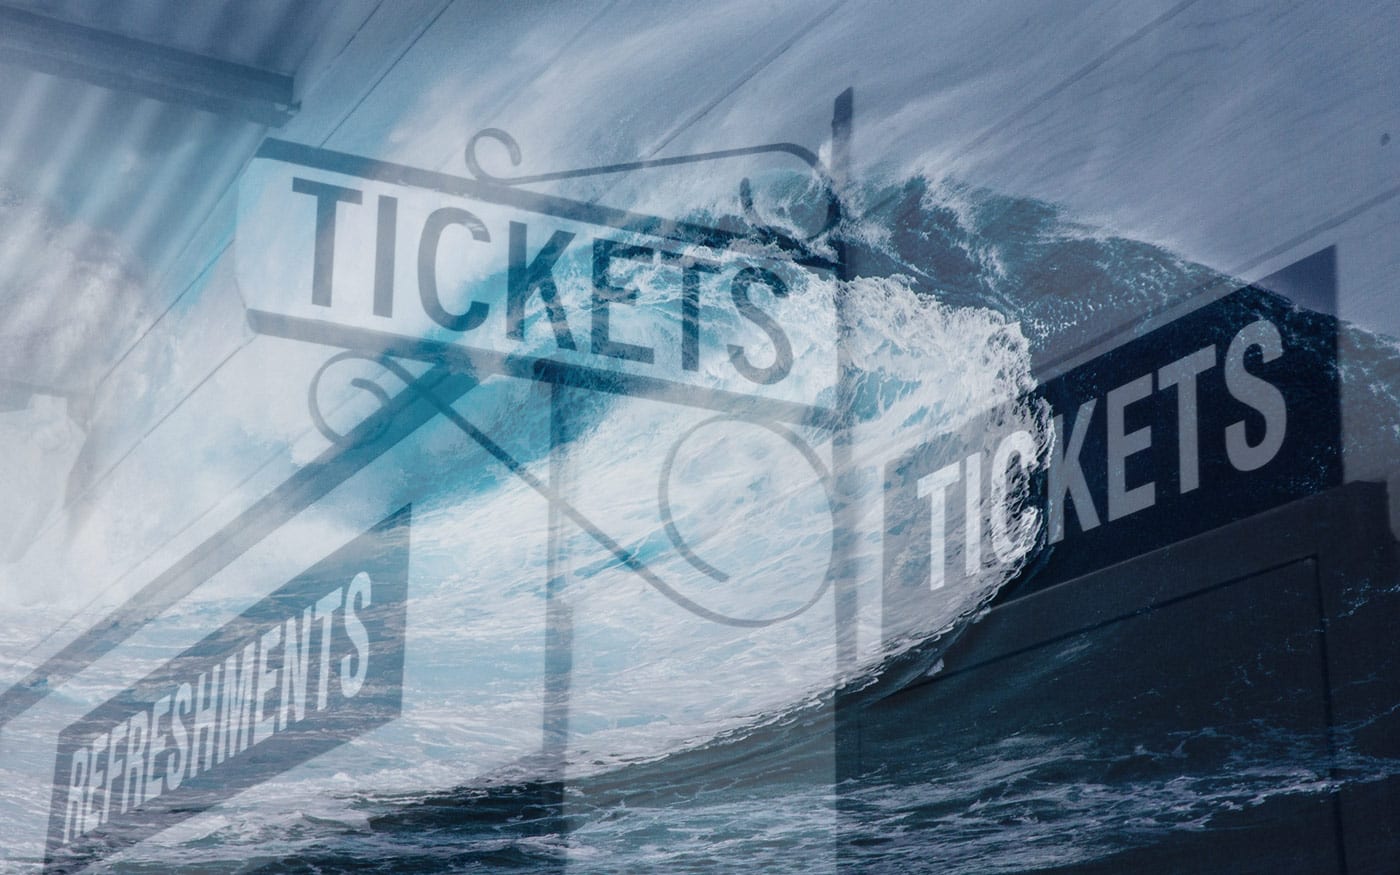 Event ticket purchasing wave model